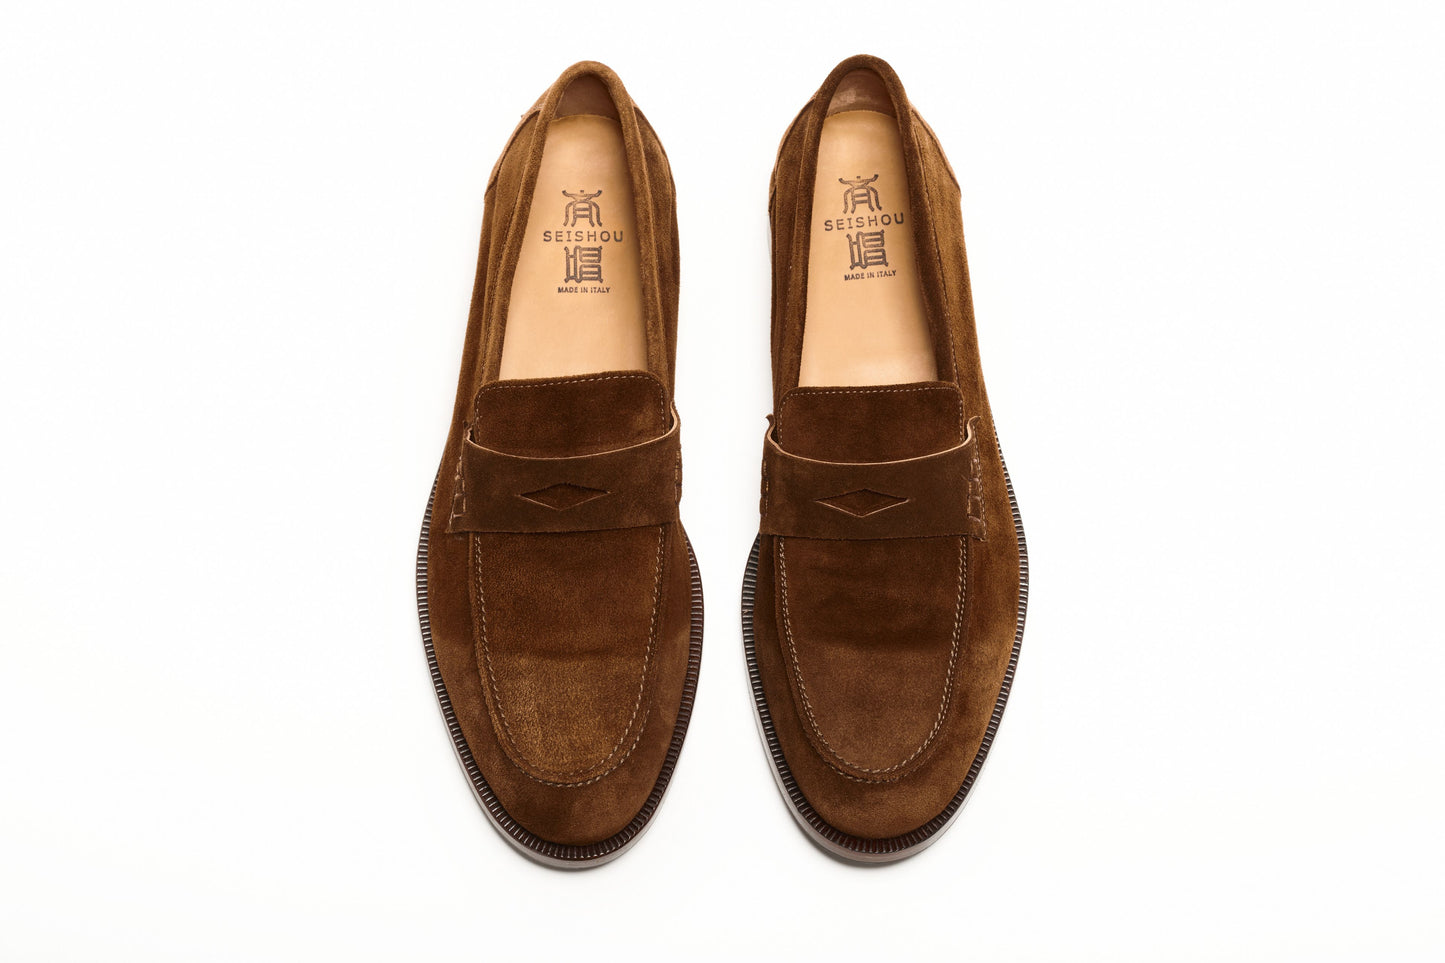 Maryland Men's Loafers